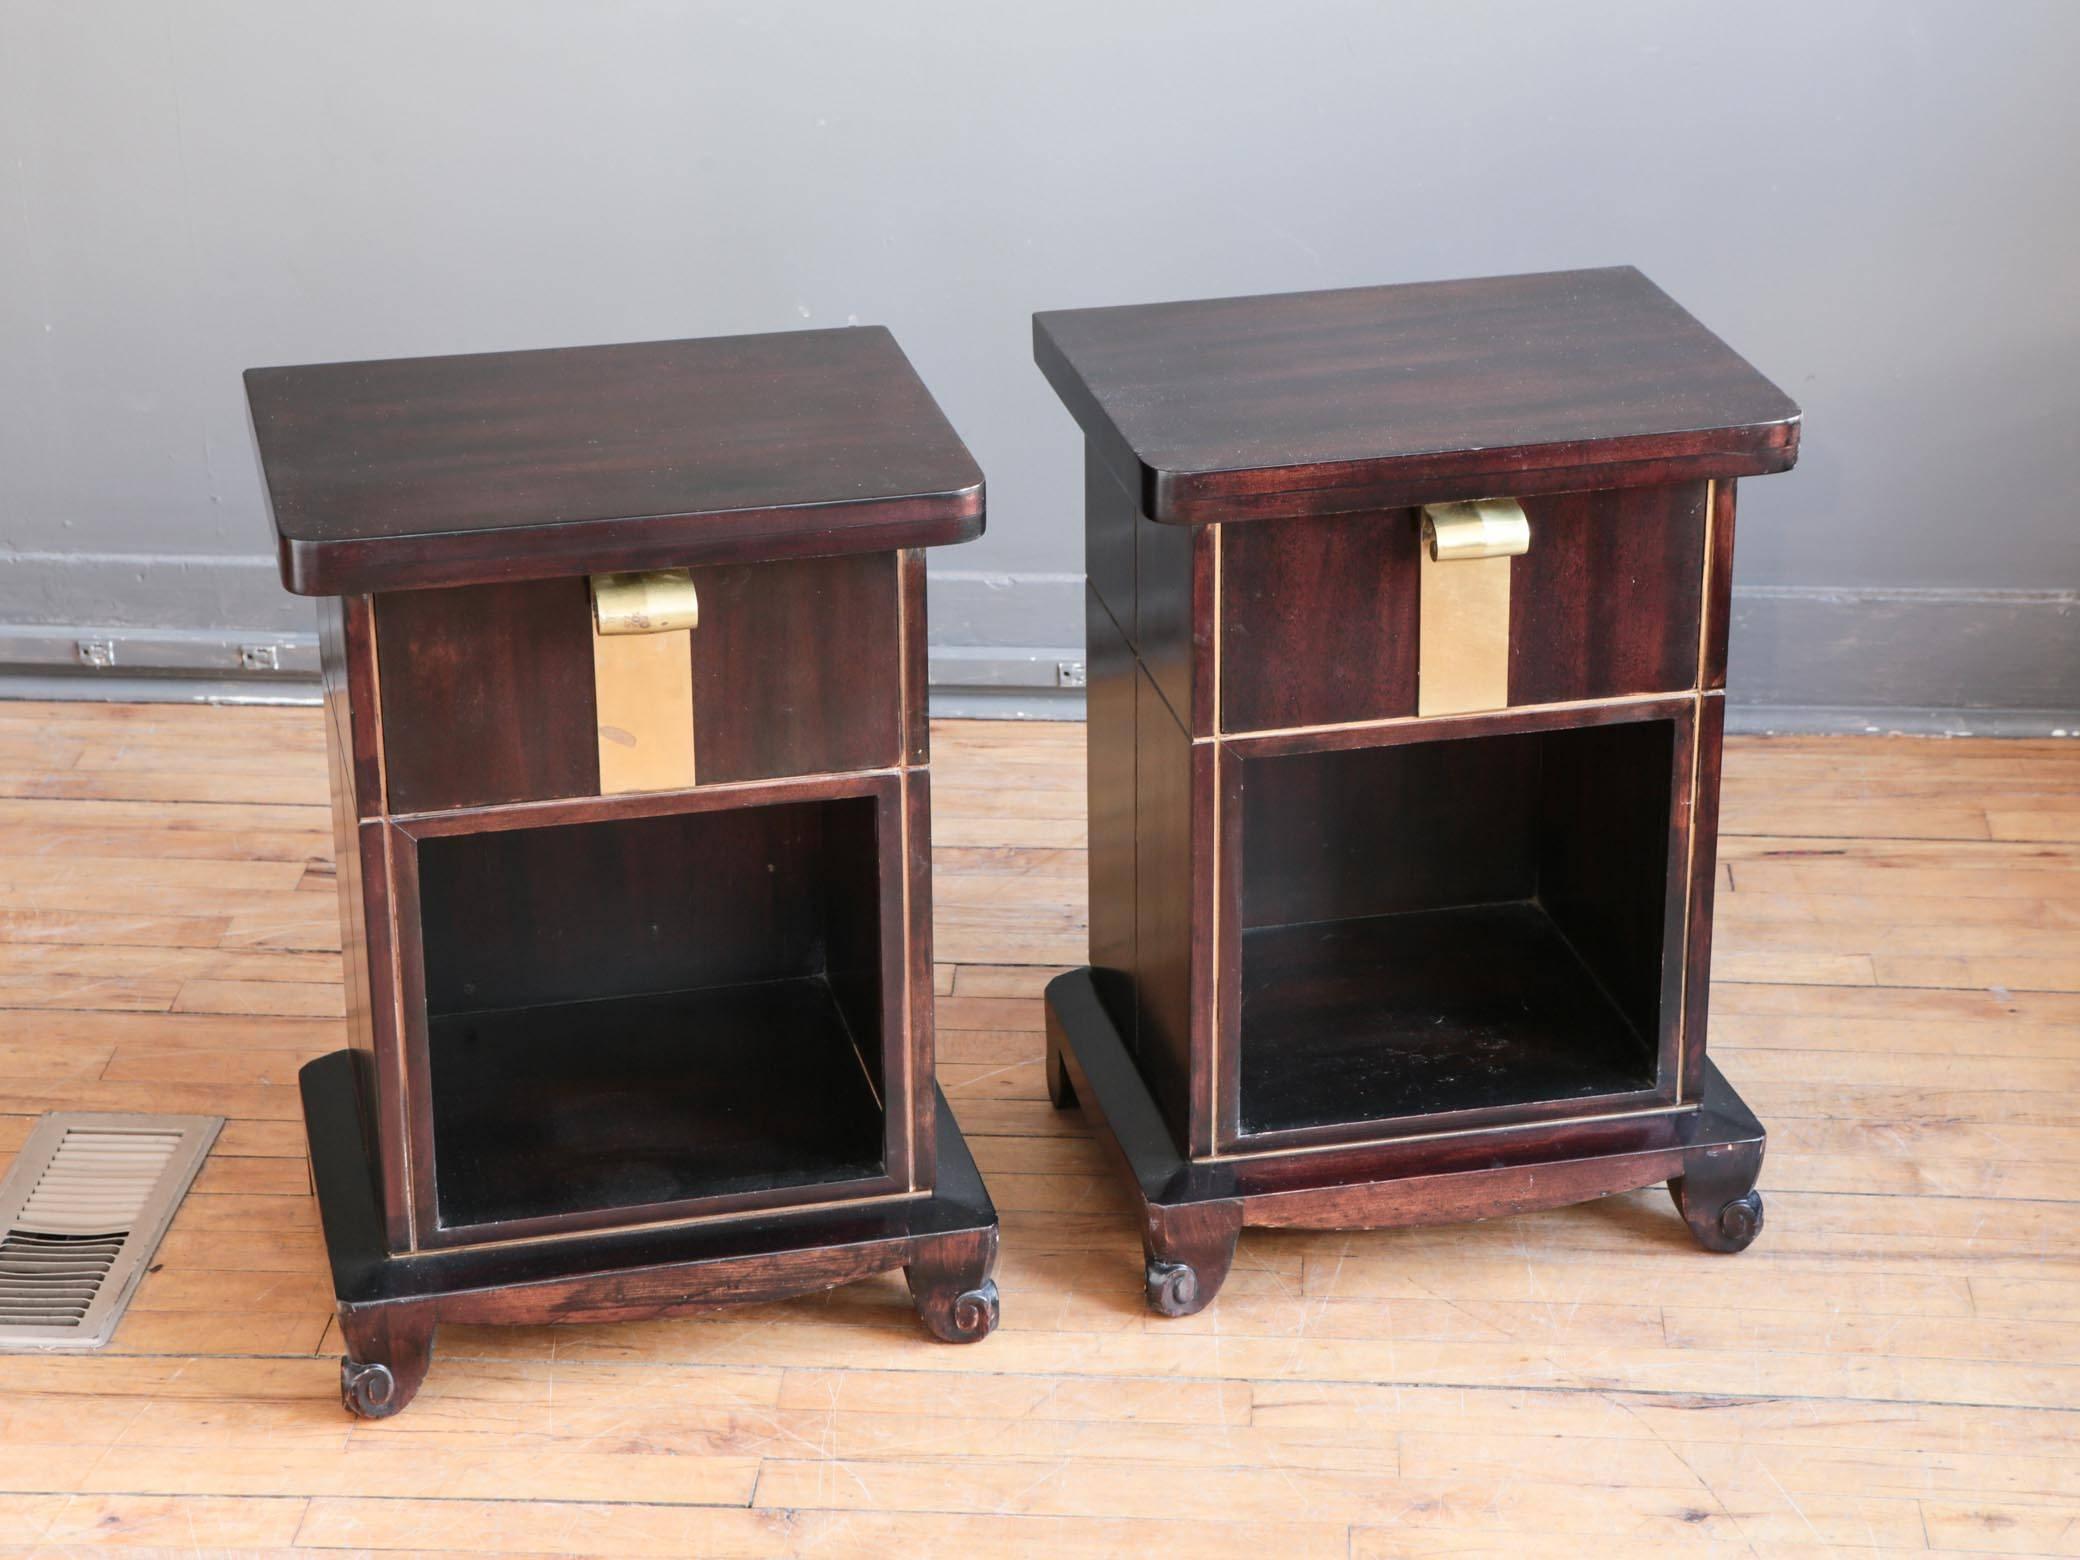 A rare pair of Art Deco nightstands or side tables in mahogany by John Stuart of New York, circa 1930s or 1940s. Each featuring one deep drawer with a sculptural, solid brass pull above an open shelf. Incised gilt decoration and scroll feet add